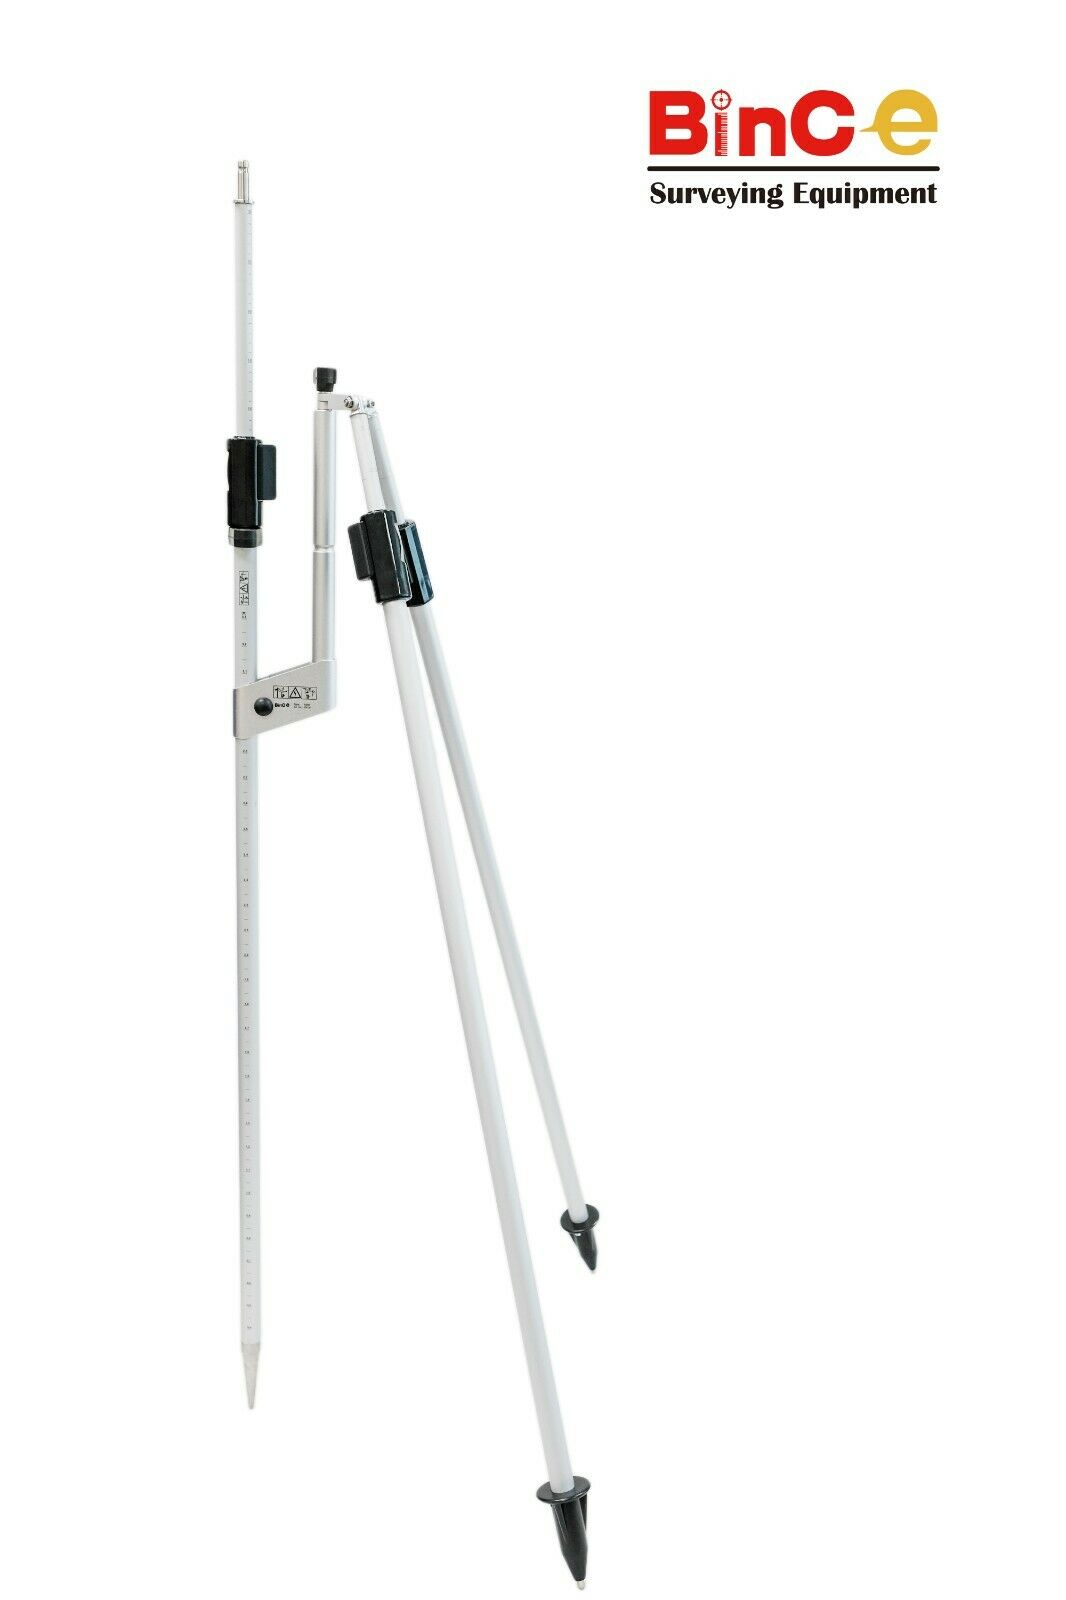 Leica Type 2.15M Telescopic Reflector Prism Pole with Dual Strut Support Bipod